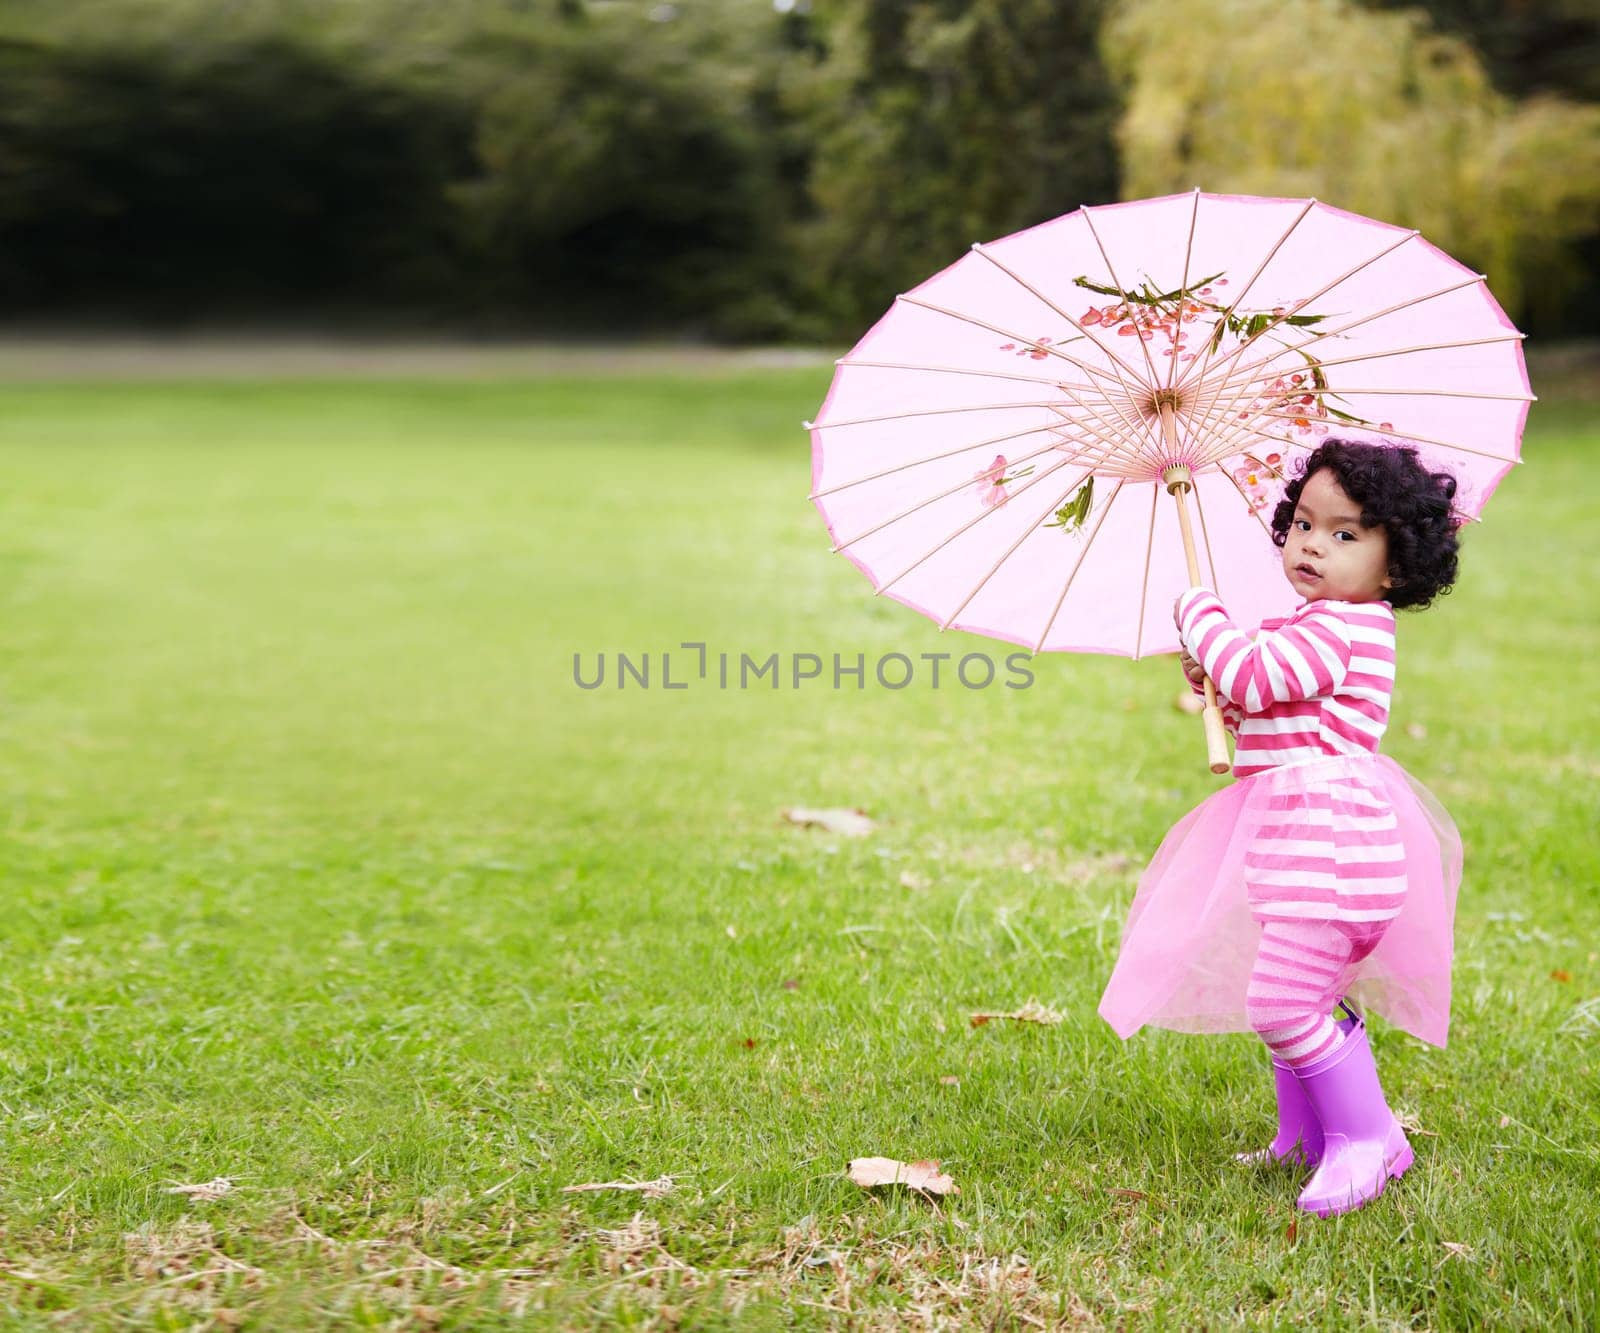 Umbrella, walking and girl child in a garden walking on the grass on summer weekend. Adorable, playful and young kid, baby or toddler with curly hair playing on the lawn in outdoor field or park